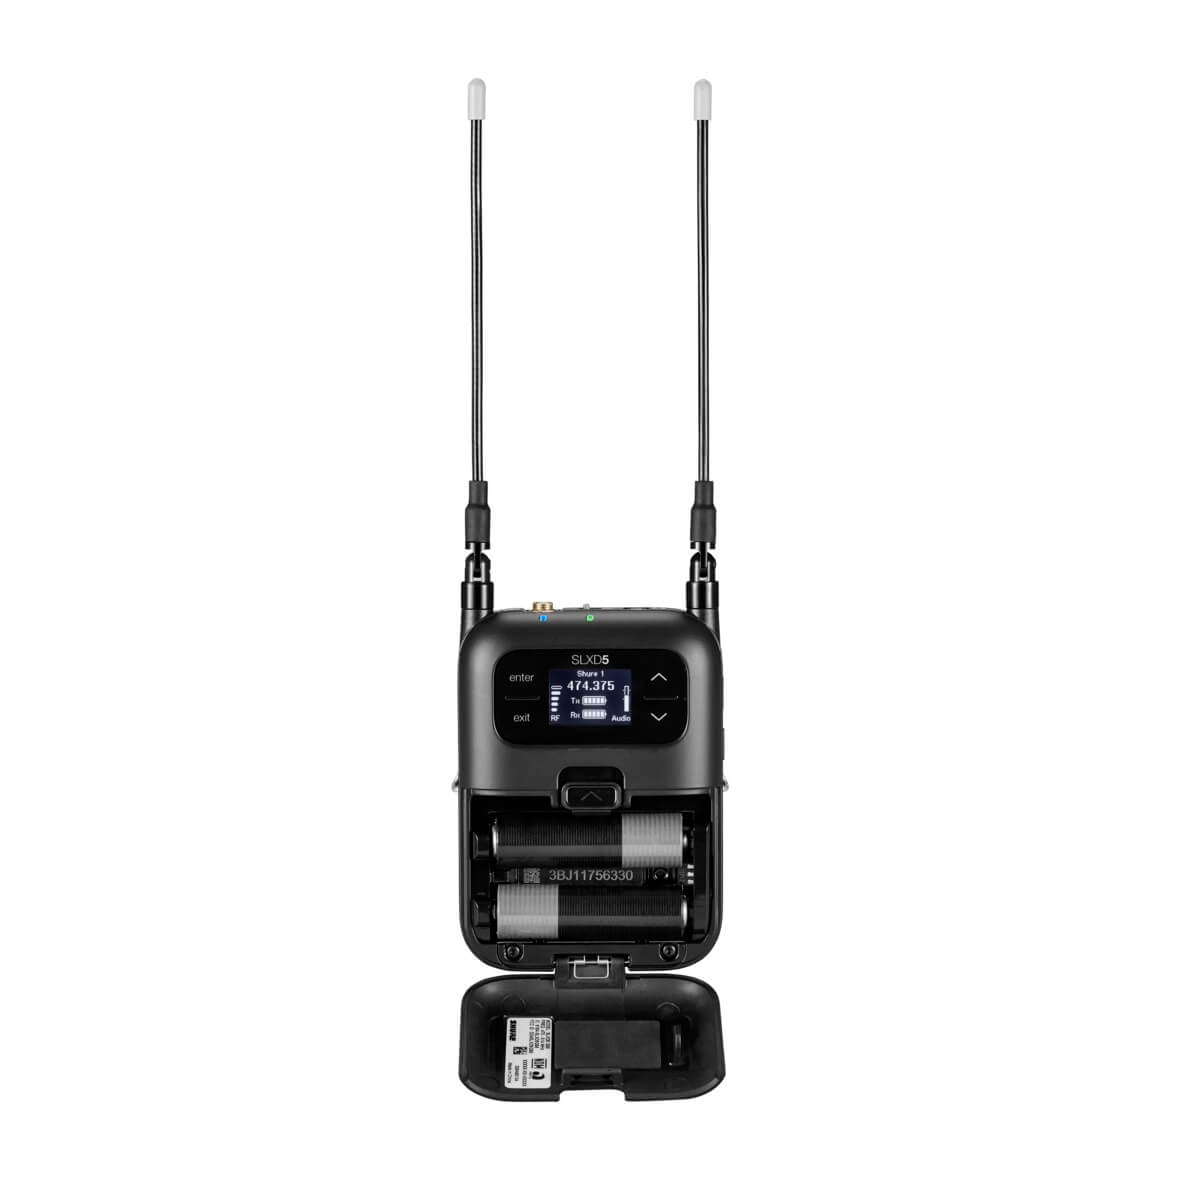 Shure SLXD5 - Portable Digital Wireless Receiver, shown with AA batteries